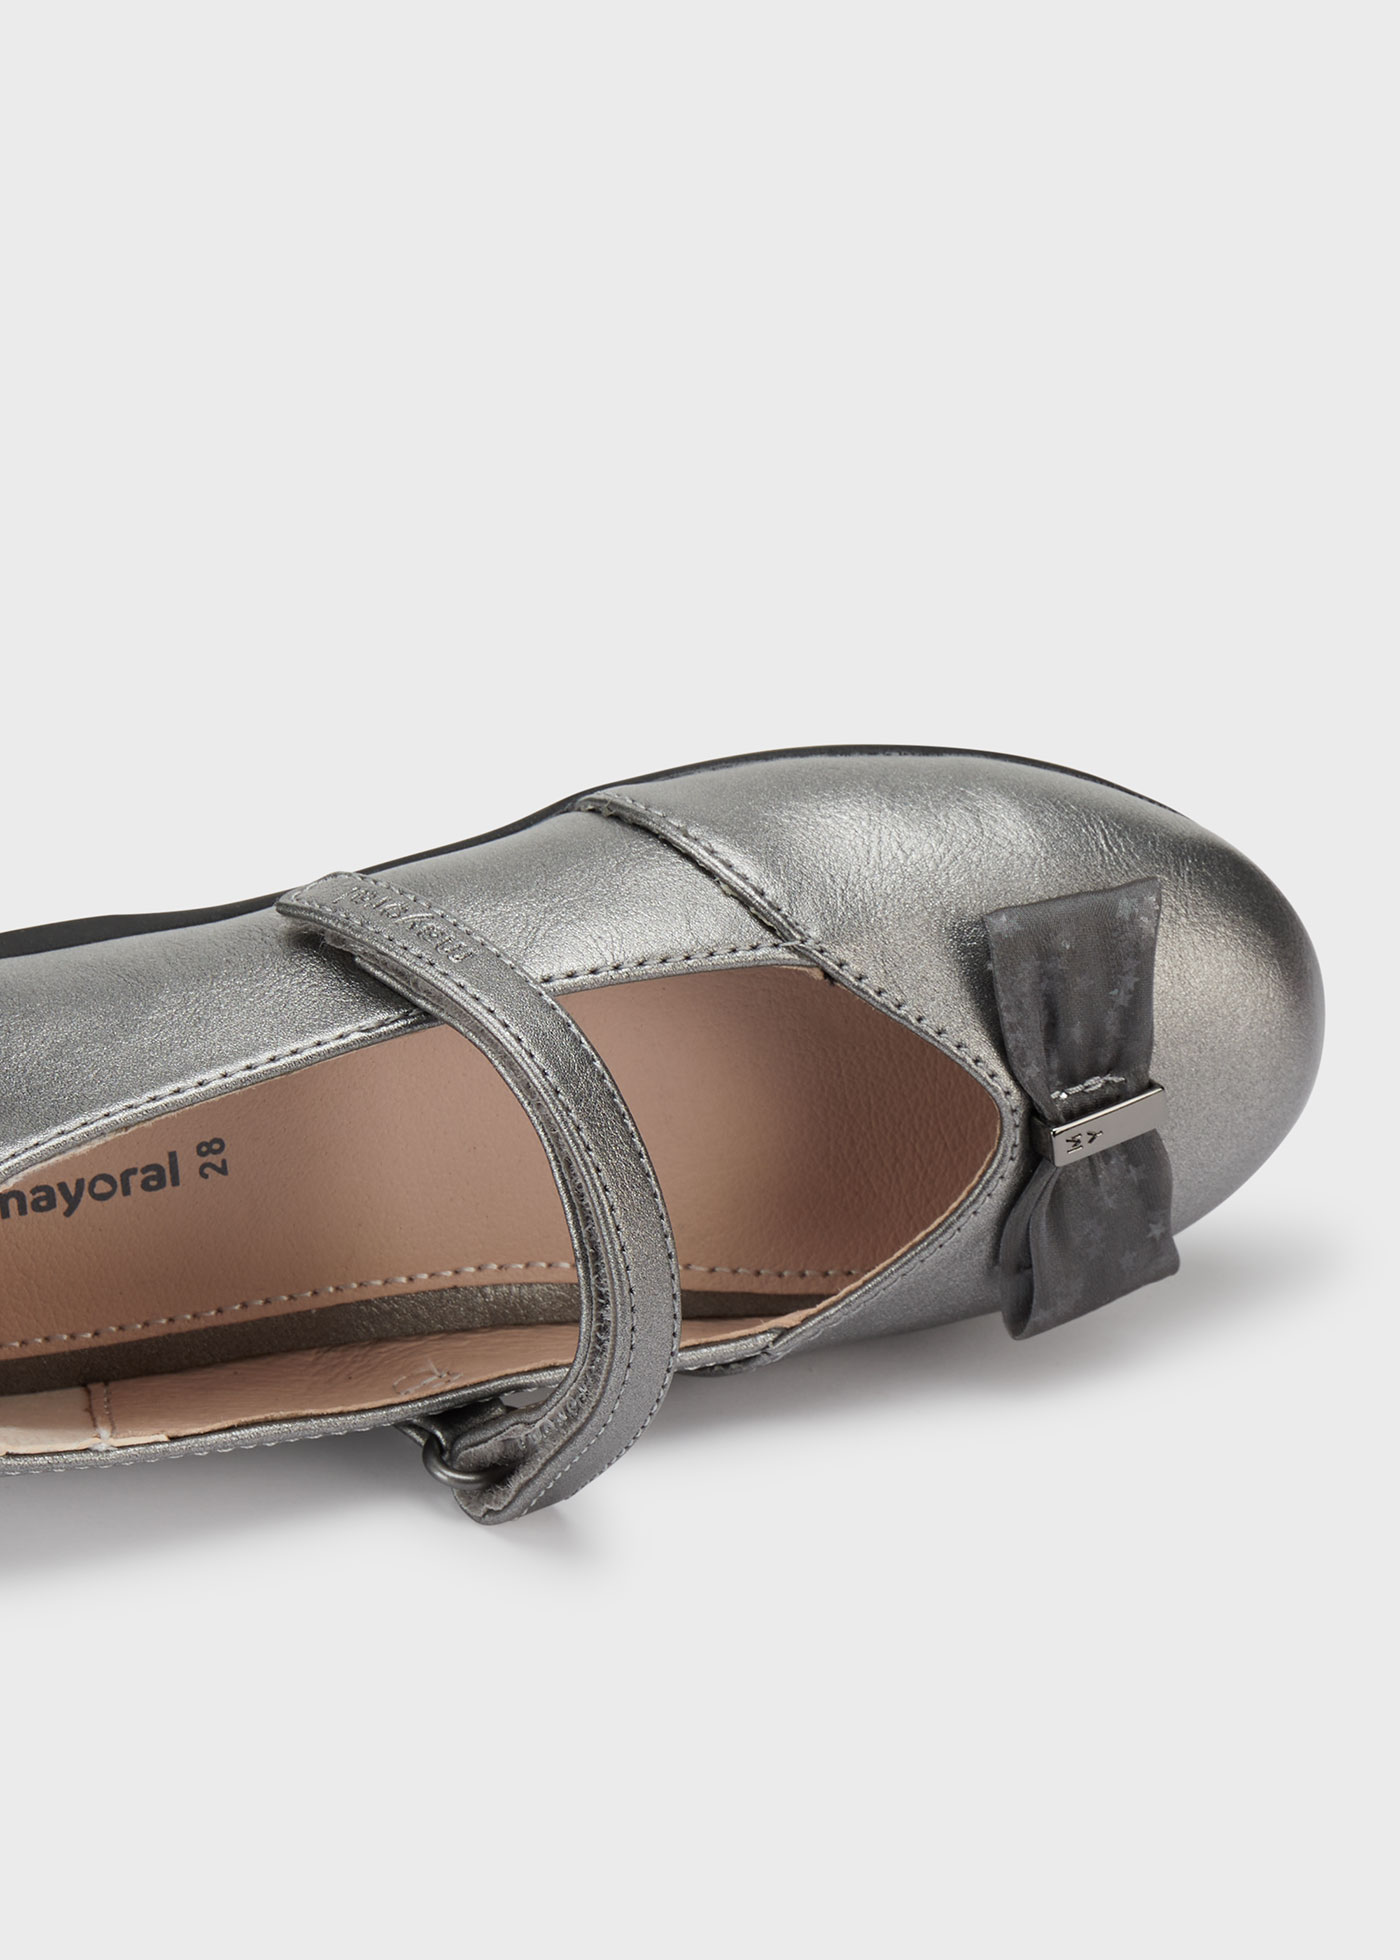 Girl bow ballet flats sustainable leather